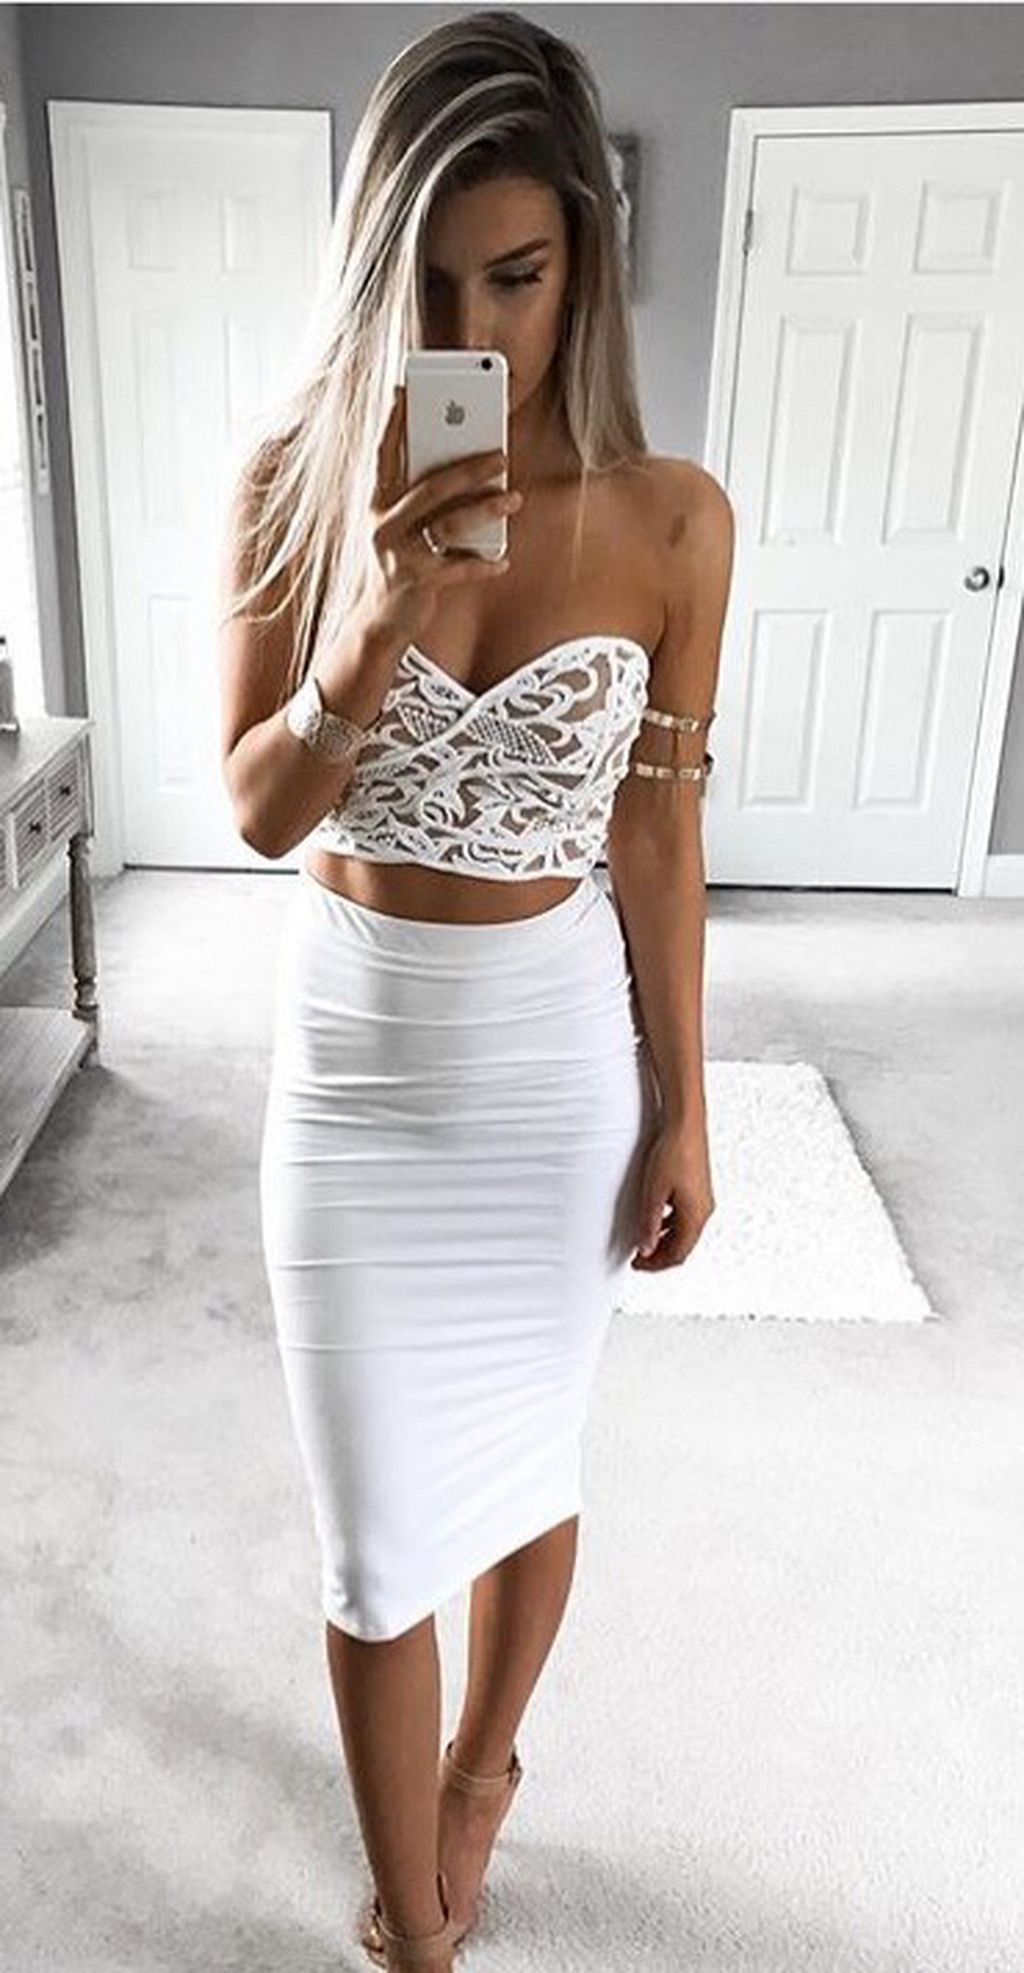 Faculteit redden koolhydraat Lace crop top and pencil skirt | All White Party Outfit Ideas For Women |  Backless dress, Crop top, Formal wear